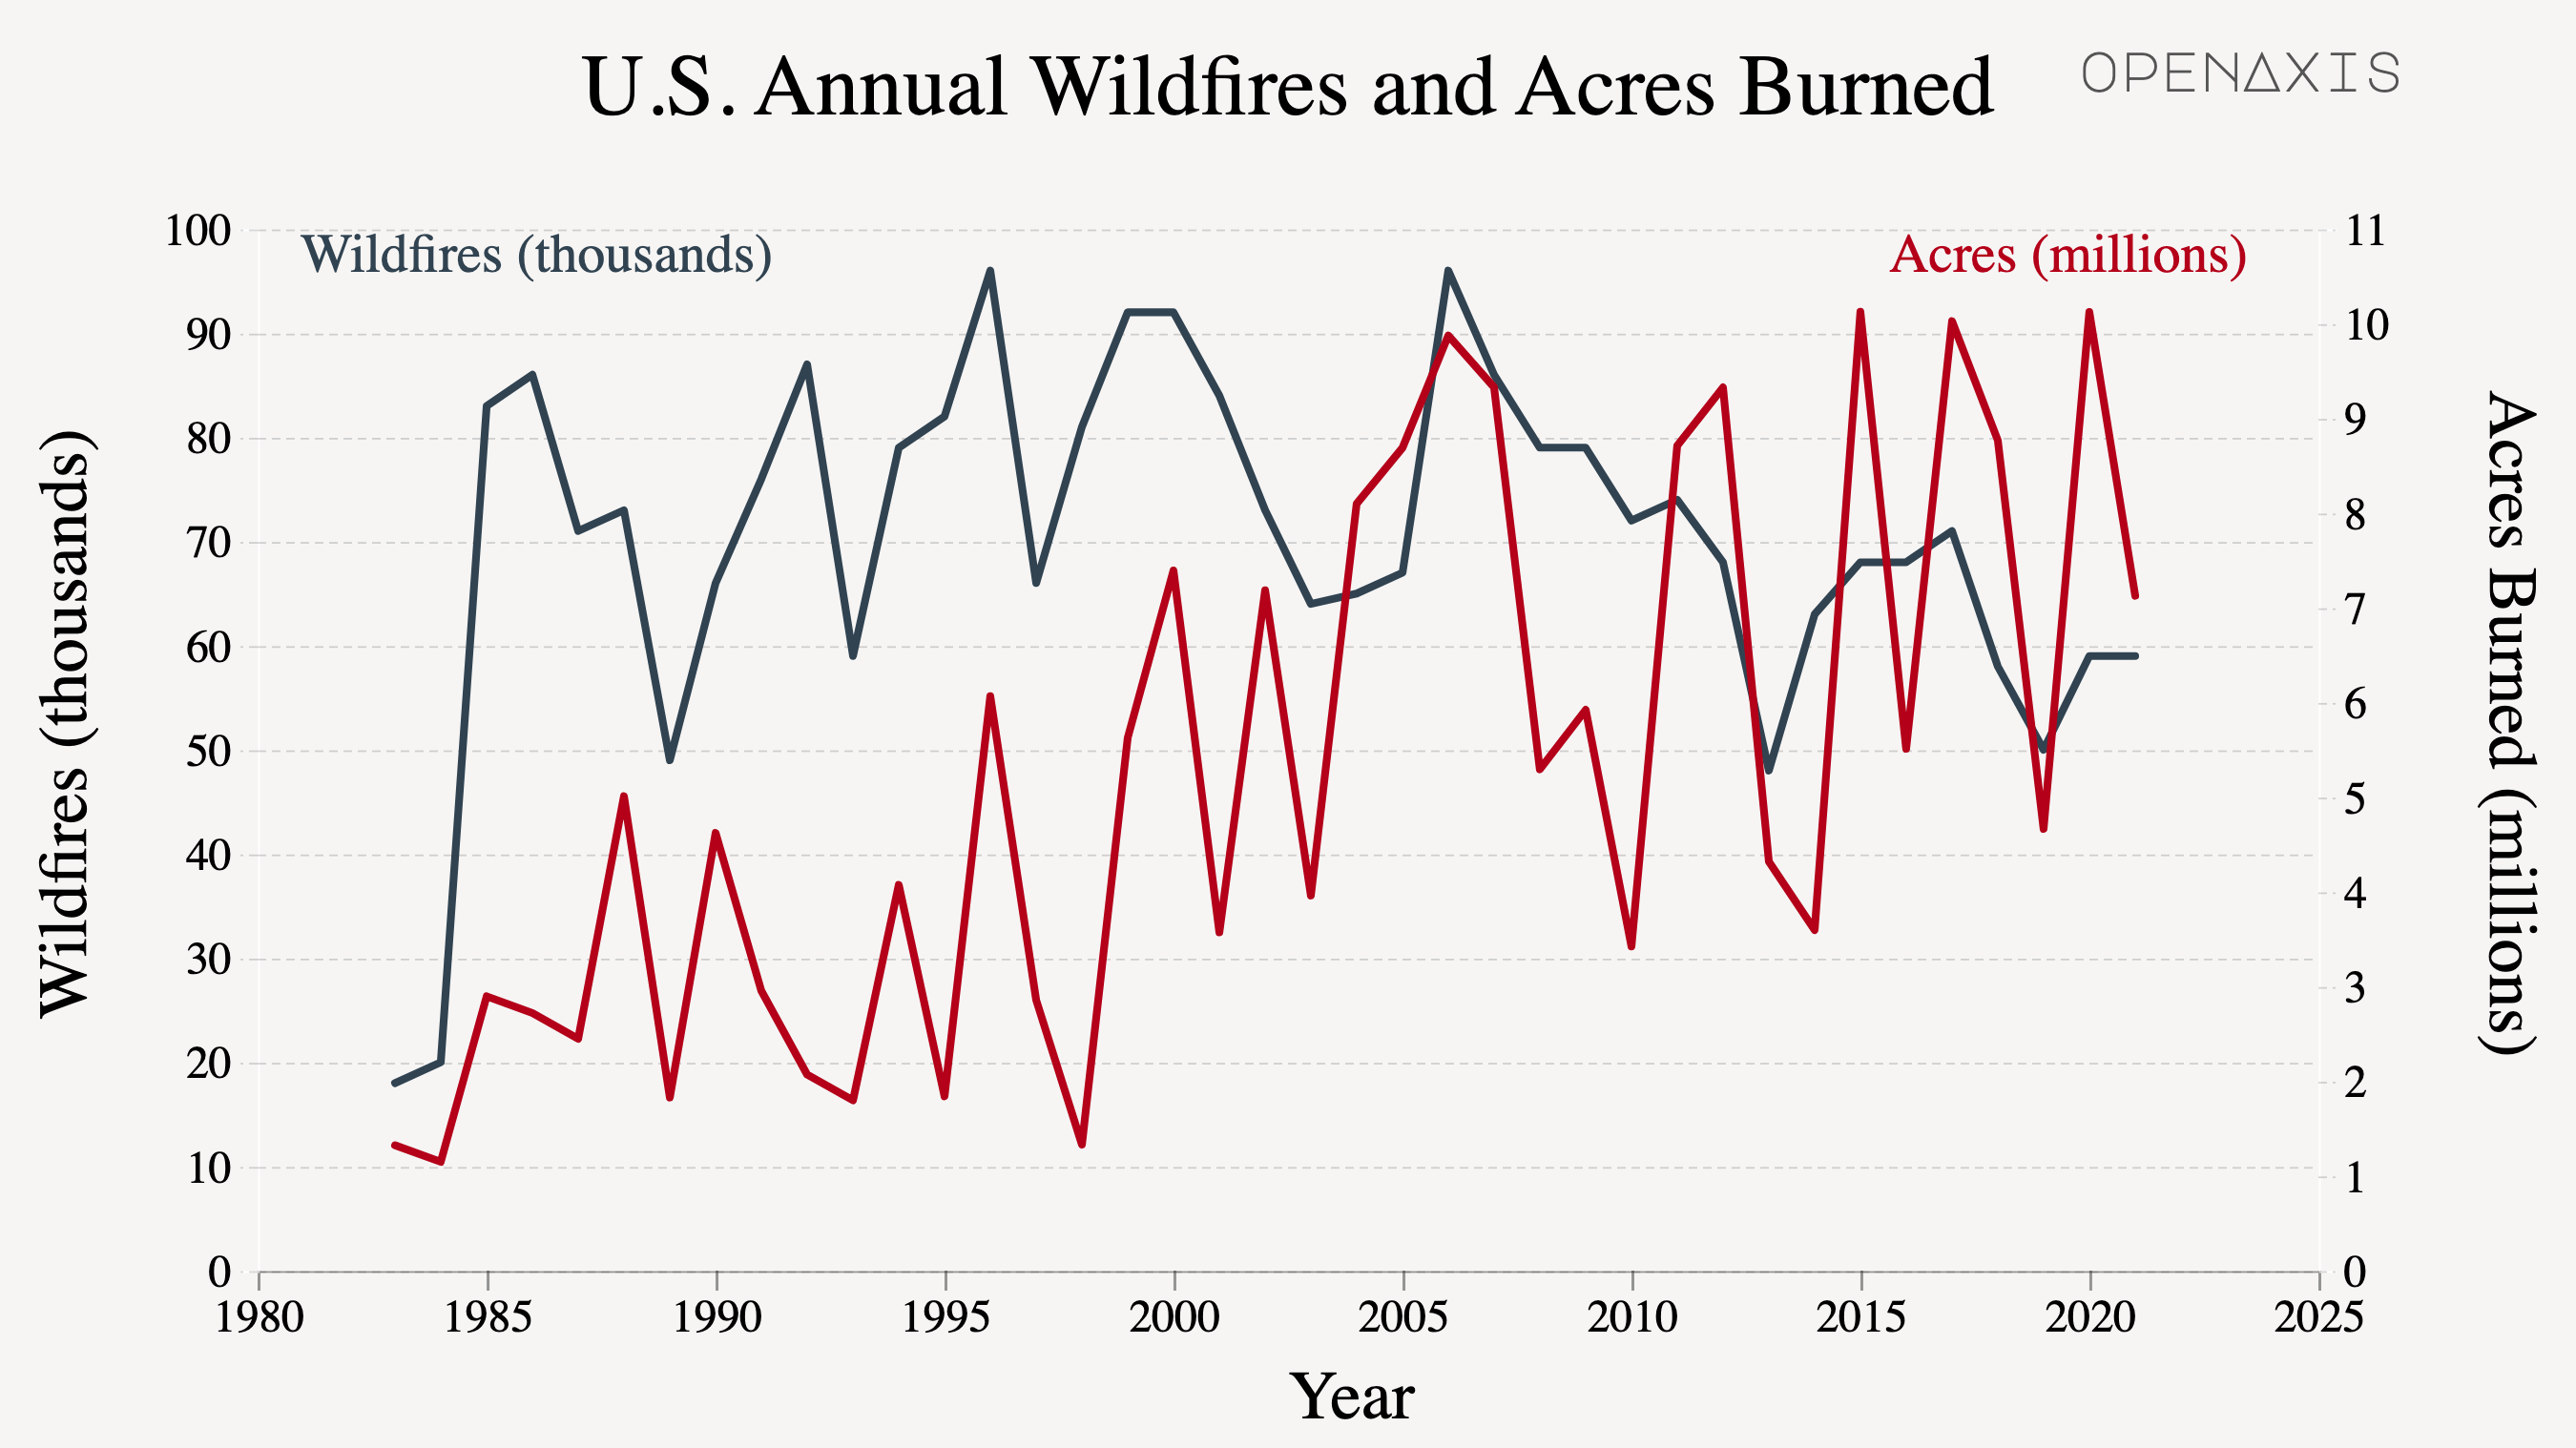 " U.S. Annual Wildfires and Acres Burned"